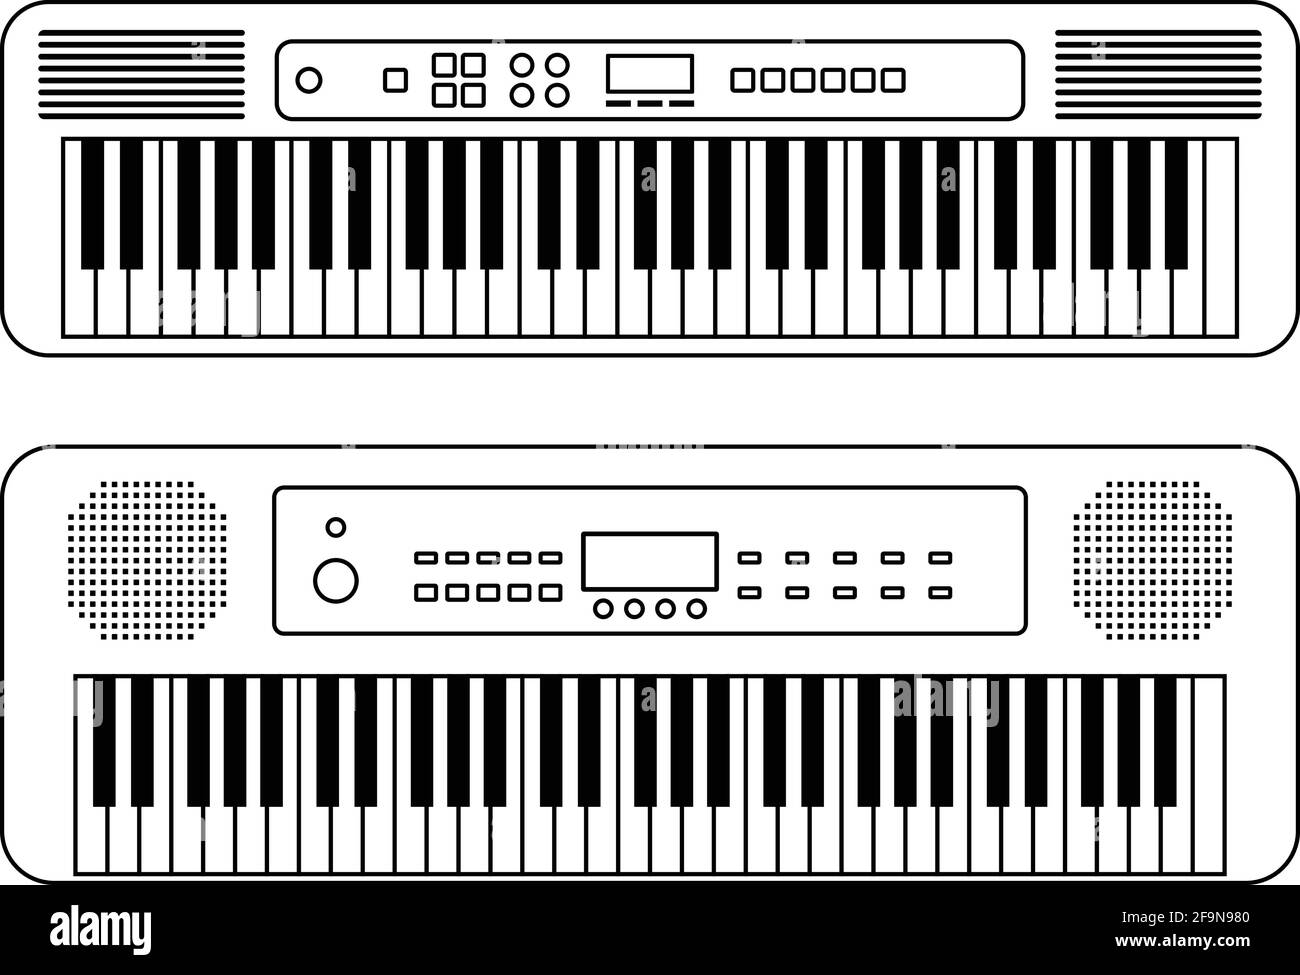 Musical instruments. Electronic keyboard. Vector illustration Stock Vector